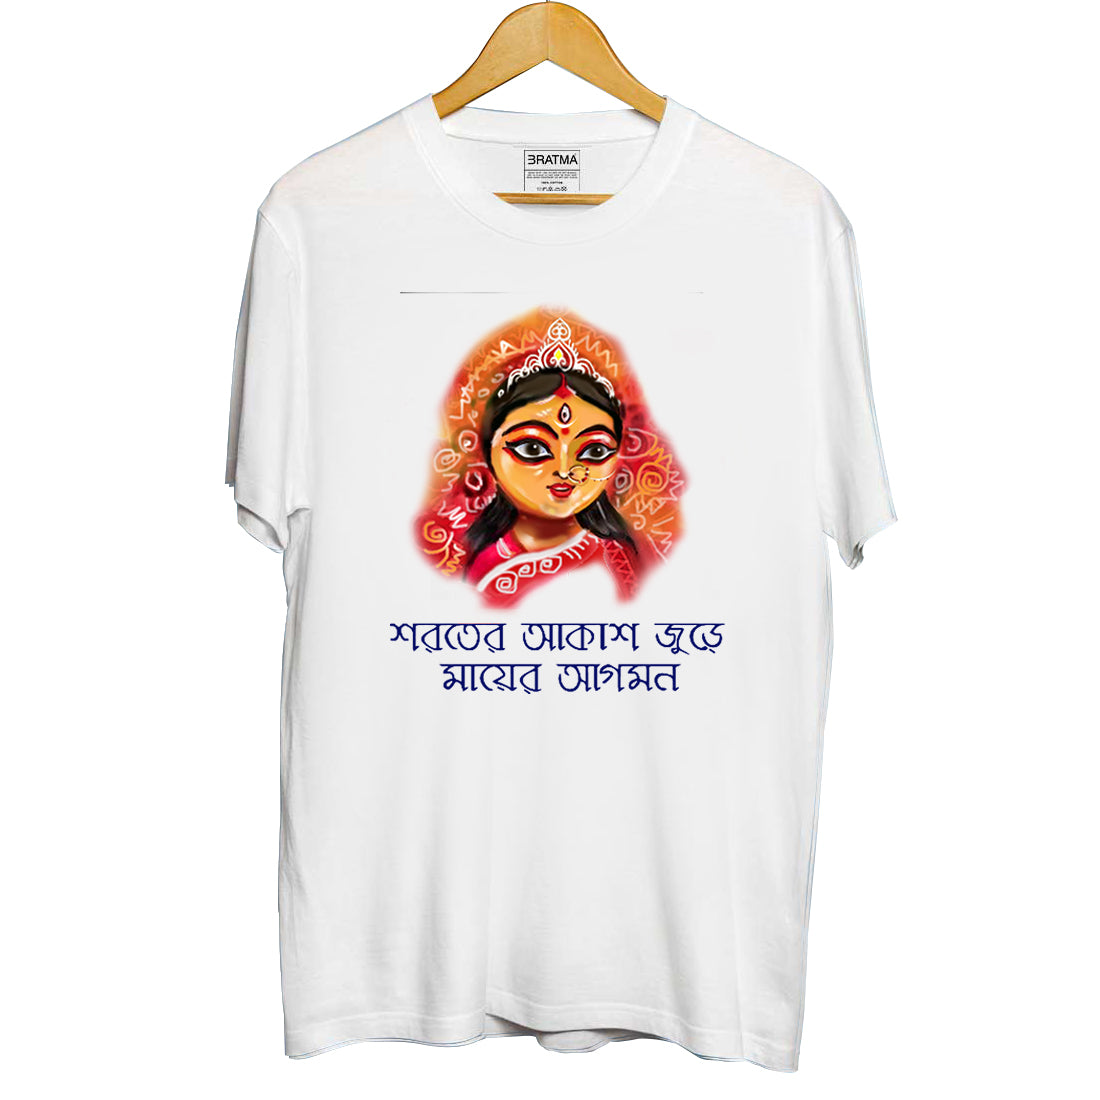 Durga puja/Festival/Ocession Celebration of Puja _Customized T-Shirt for Women